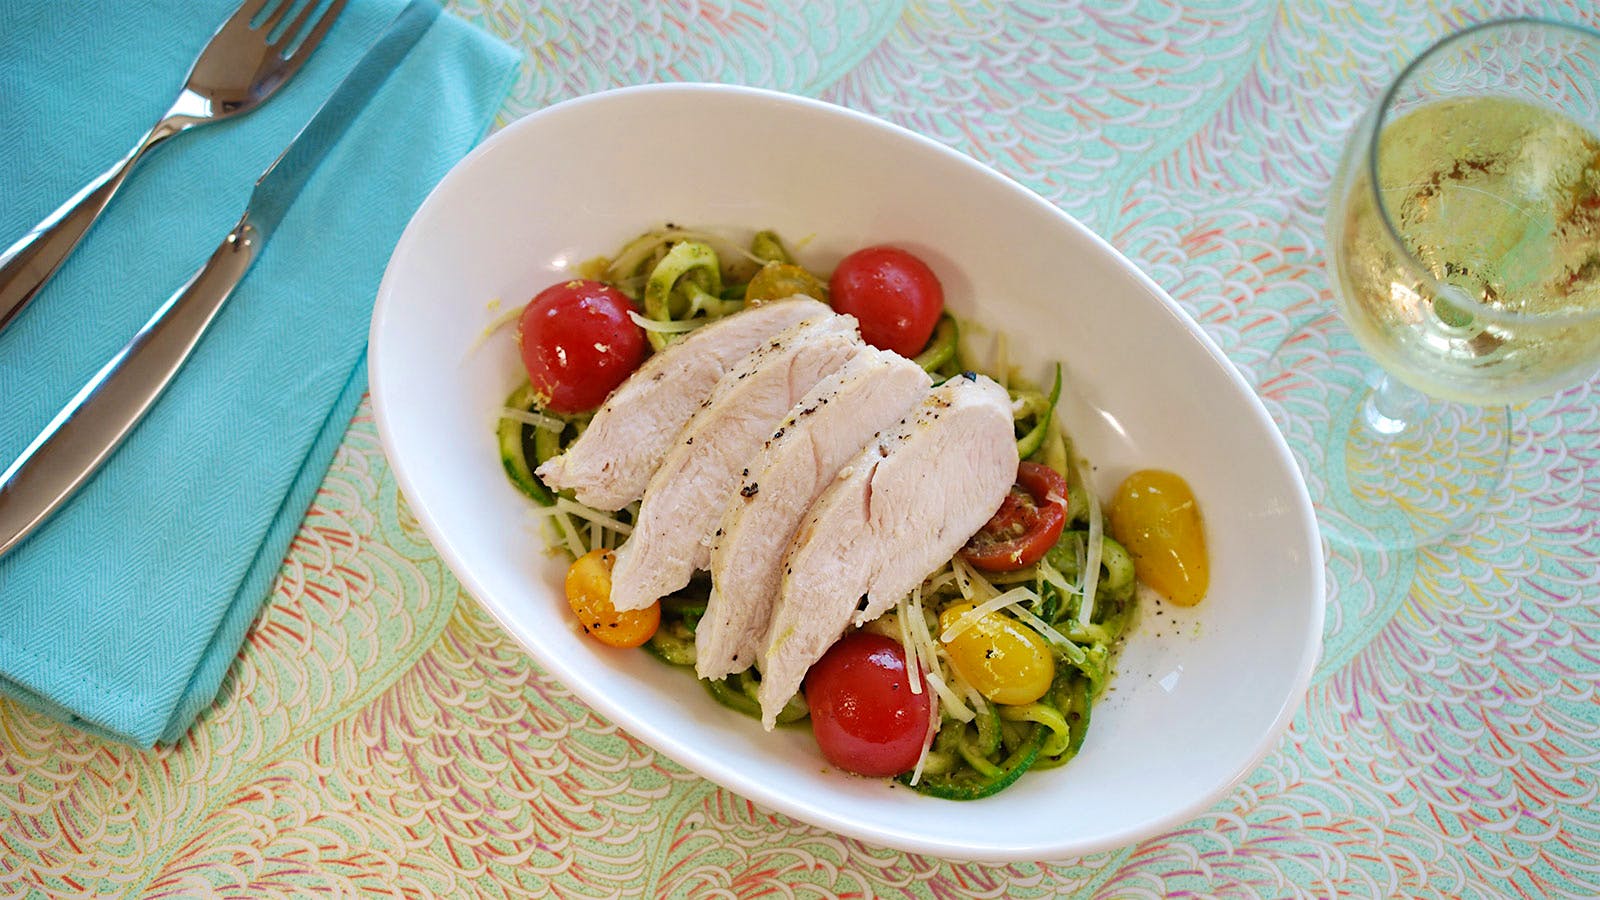 8 & $20: Chicken Breasts with Pesto 'Zoodles'